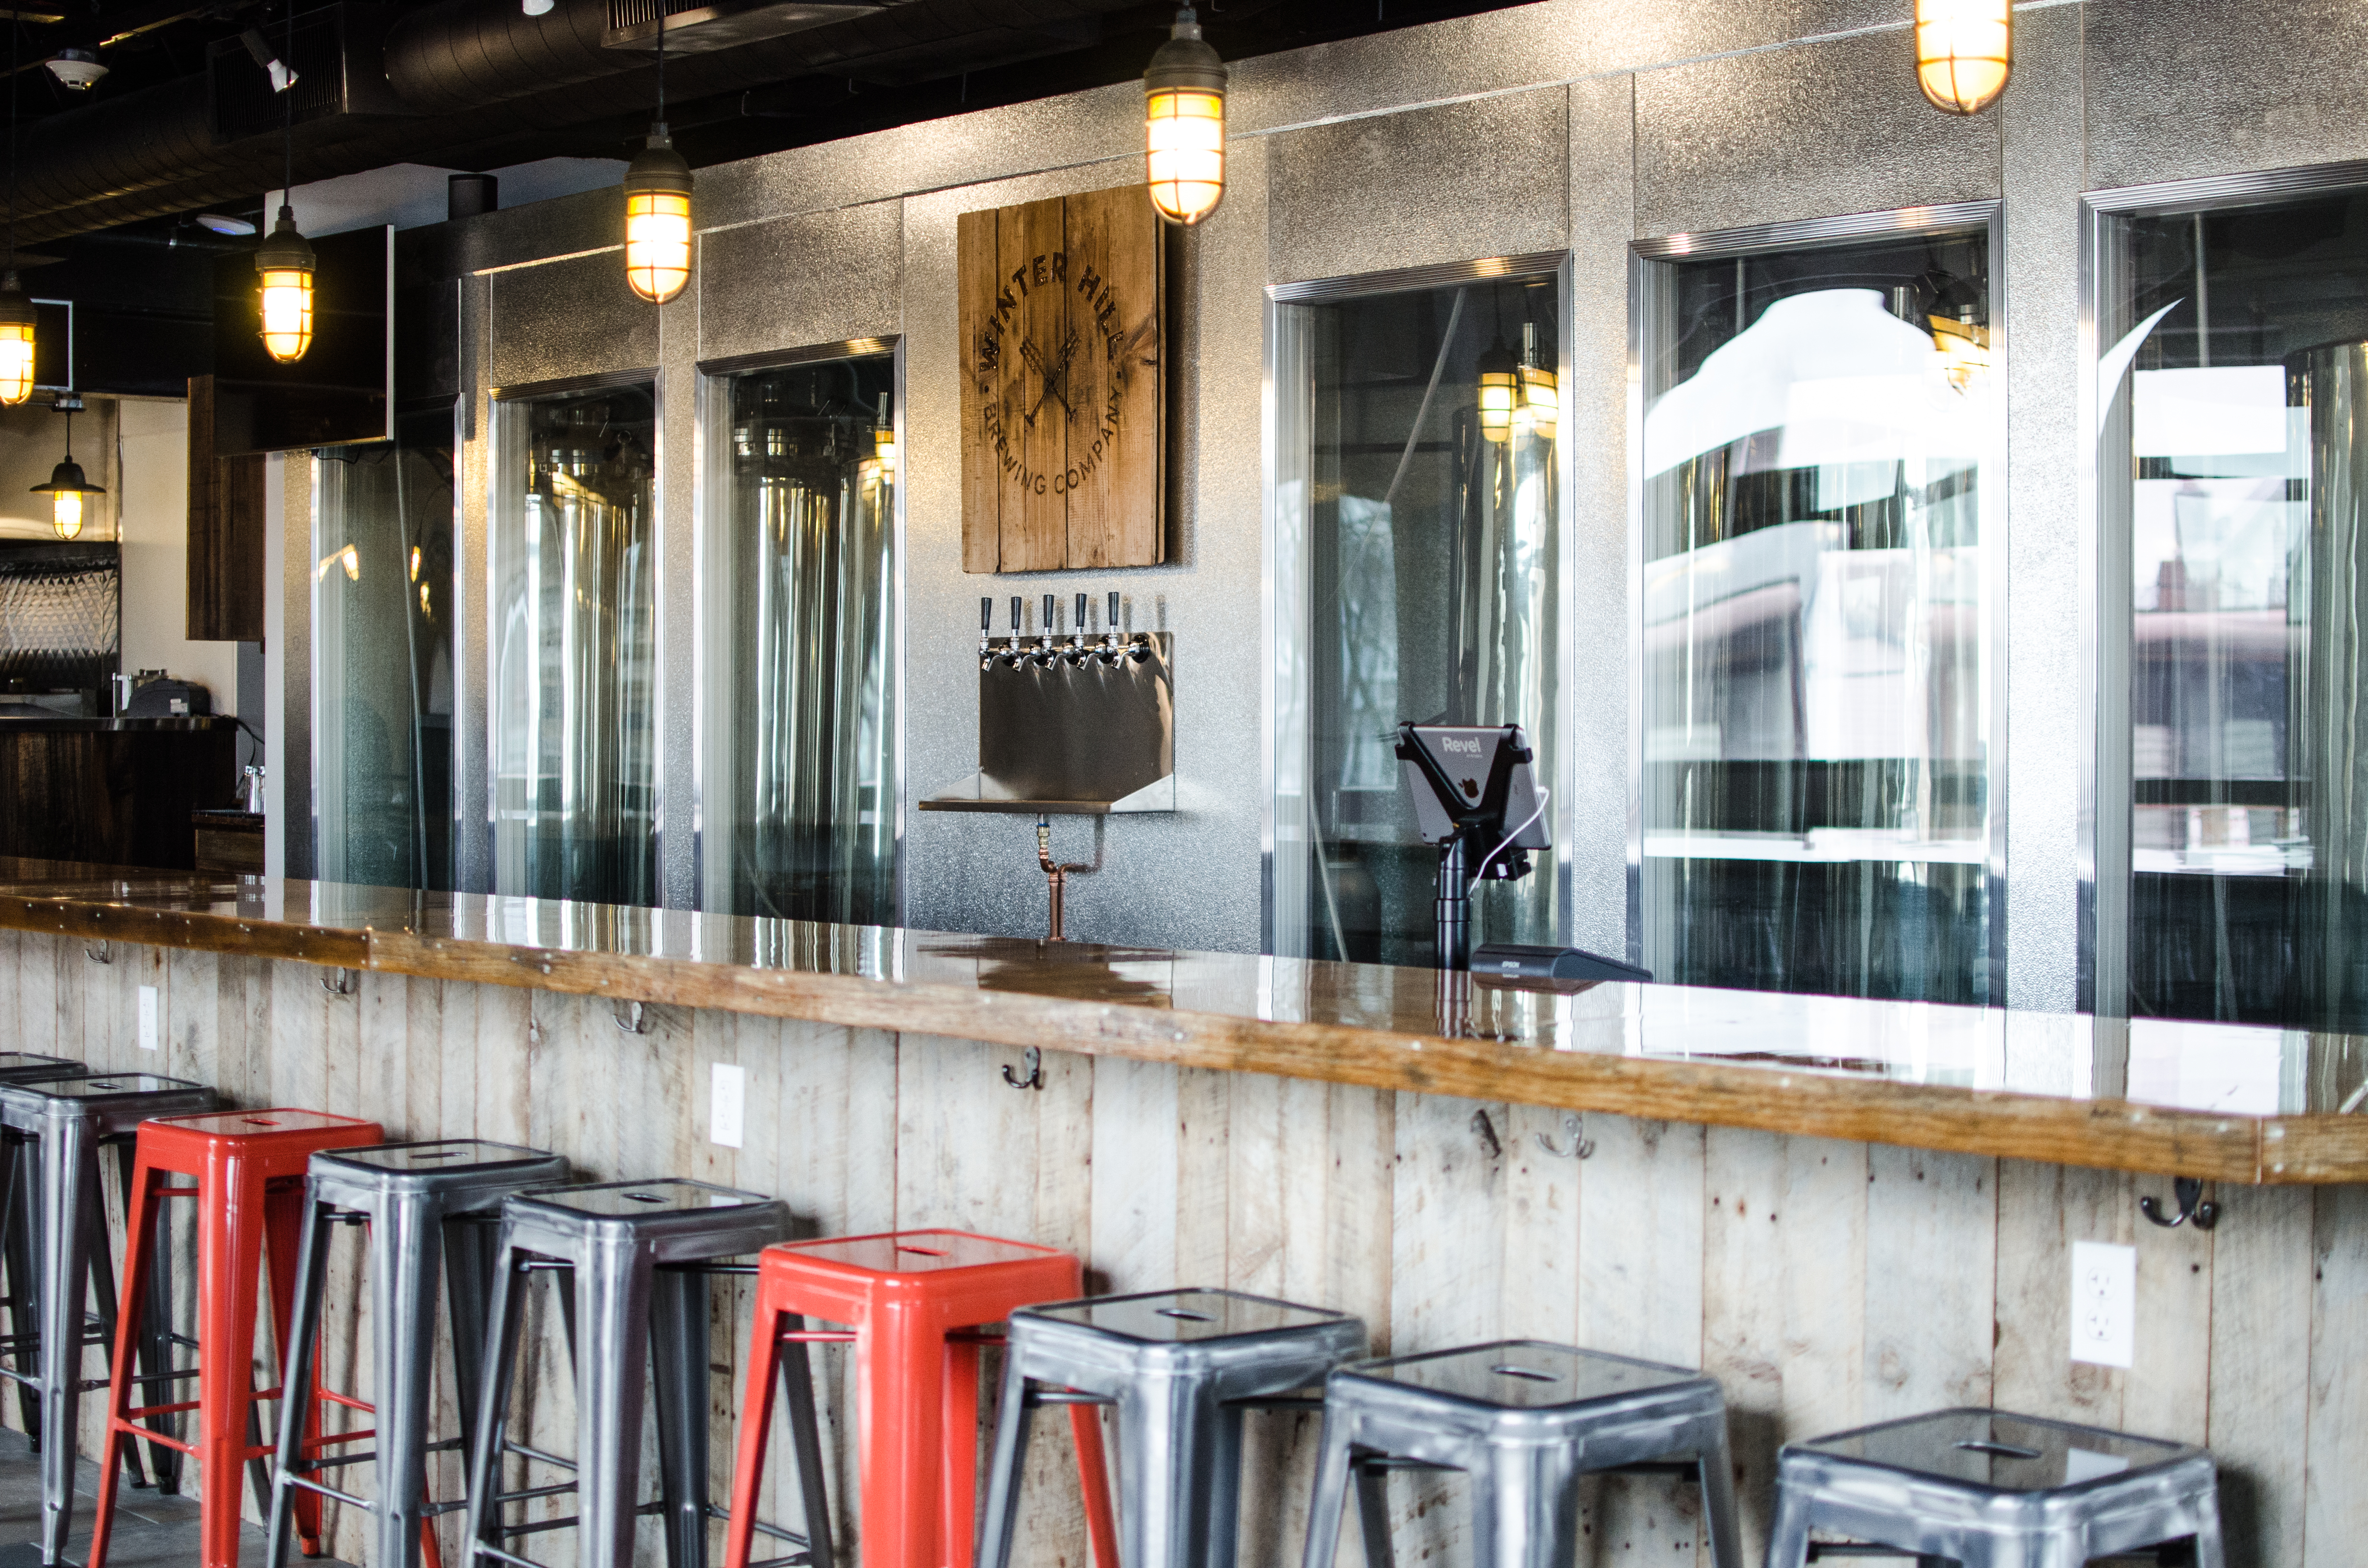 Interior shot of the bar at a brewery. A glossy wooden bar has red and silver metal stools.